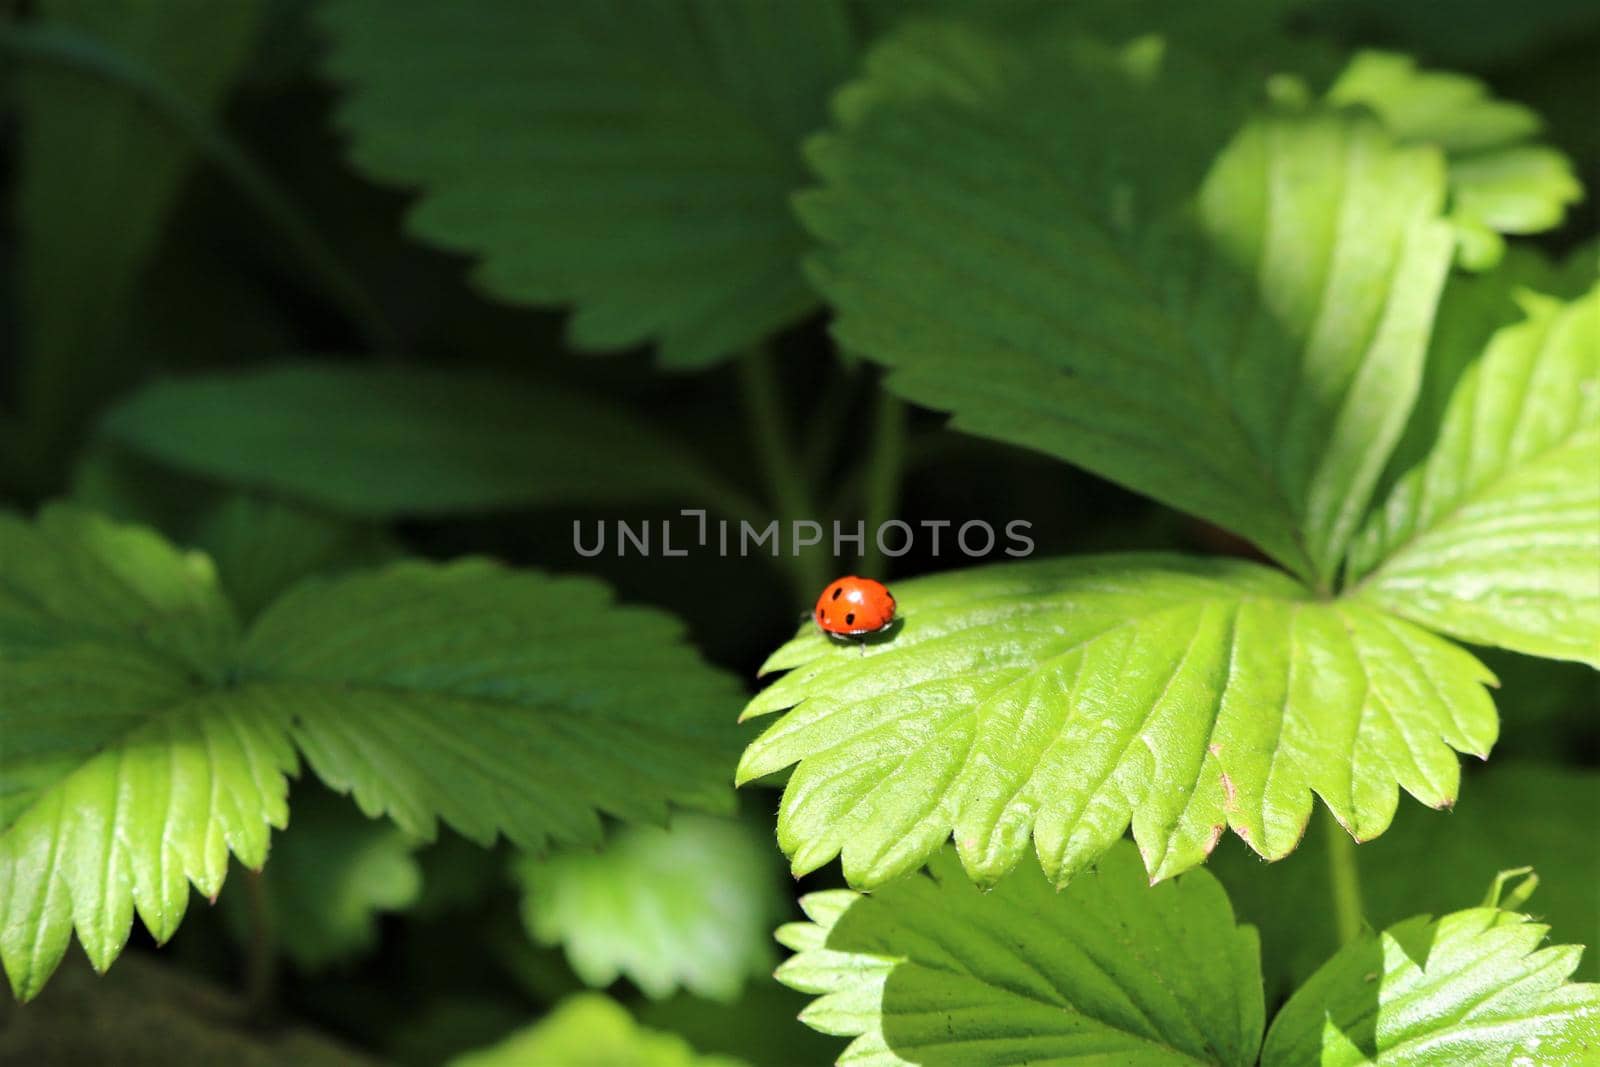 One red ladybug on a strawberry leaf by Luise123